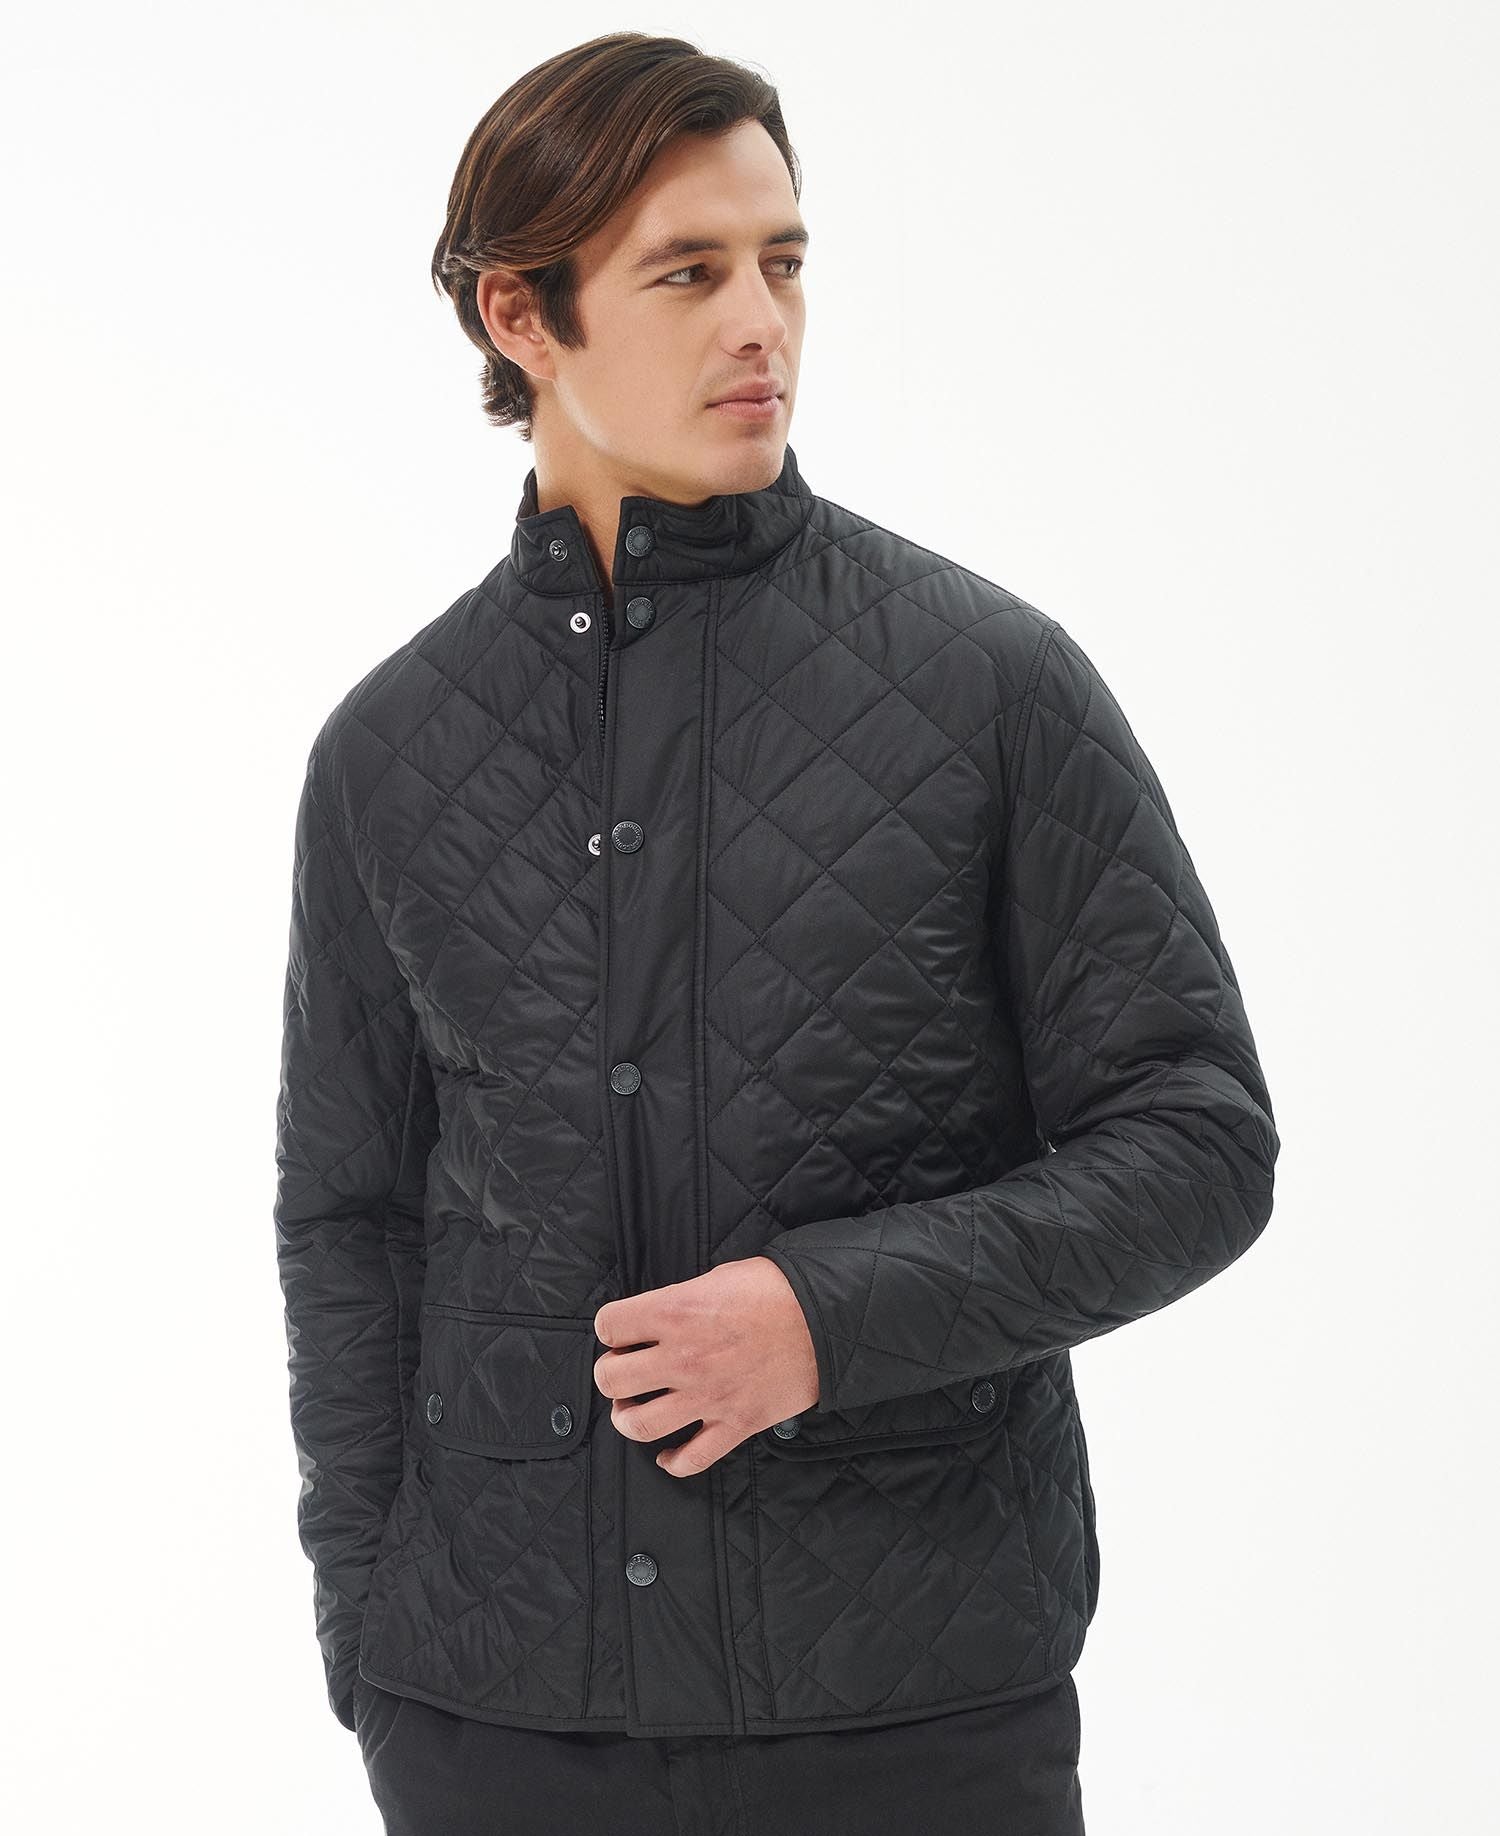 Barbour Lowerdale Giacca Trapuntata MQU1715NY51